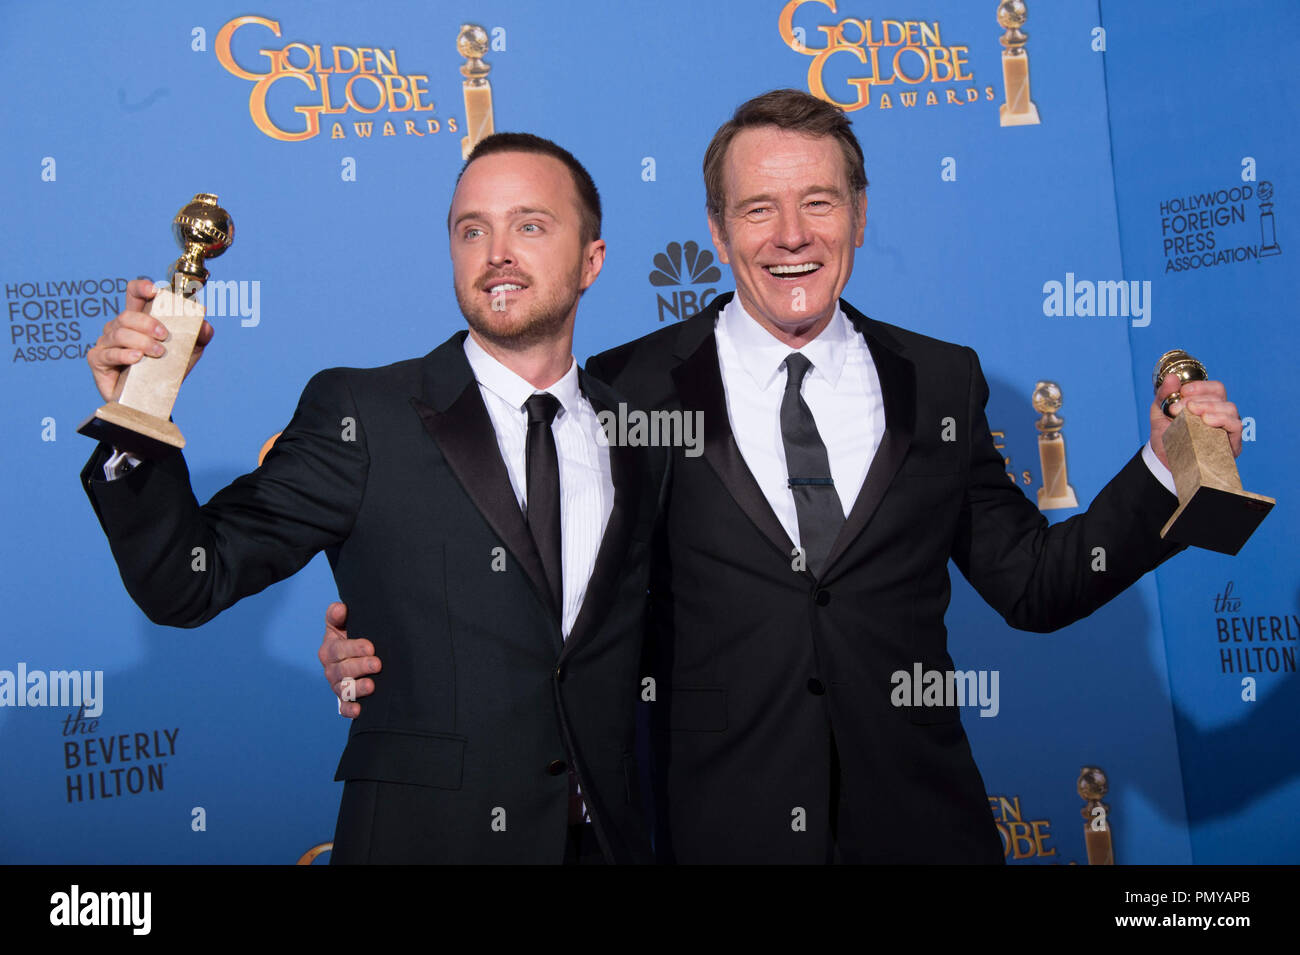 For BEST TELEVISION SERIES – DRAMA, the Golden Globe is awarded to  “BREAKING BAD” (AMC), produced by Sony Pictures Television. Aaron Paul and  Bryan Cranston pose with the award backstage in the